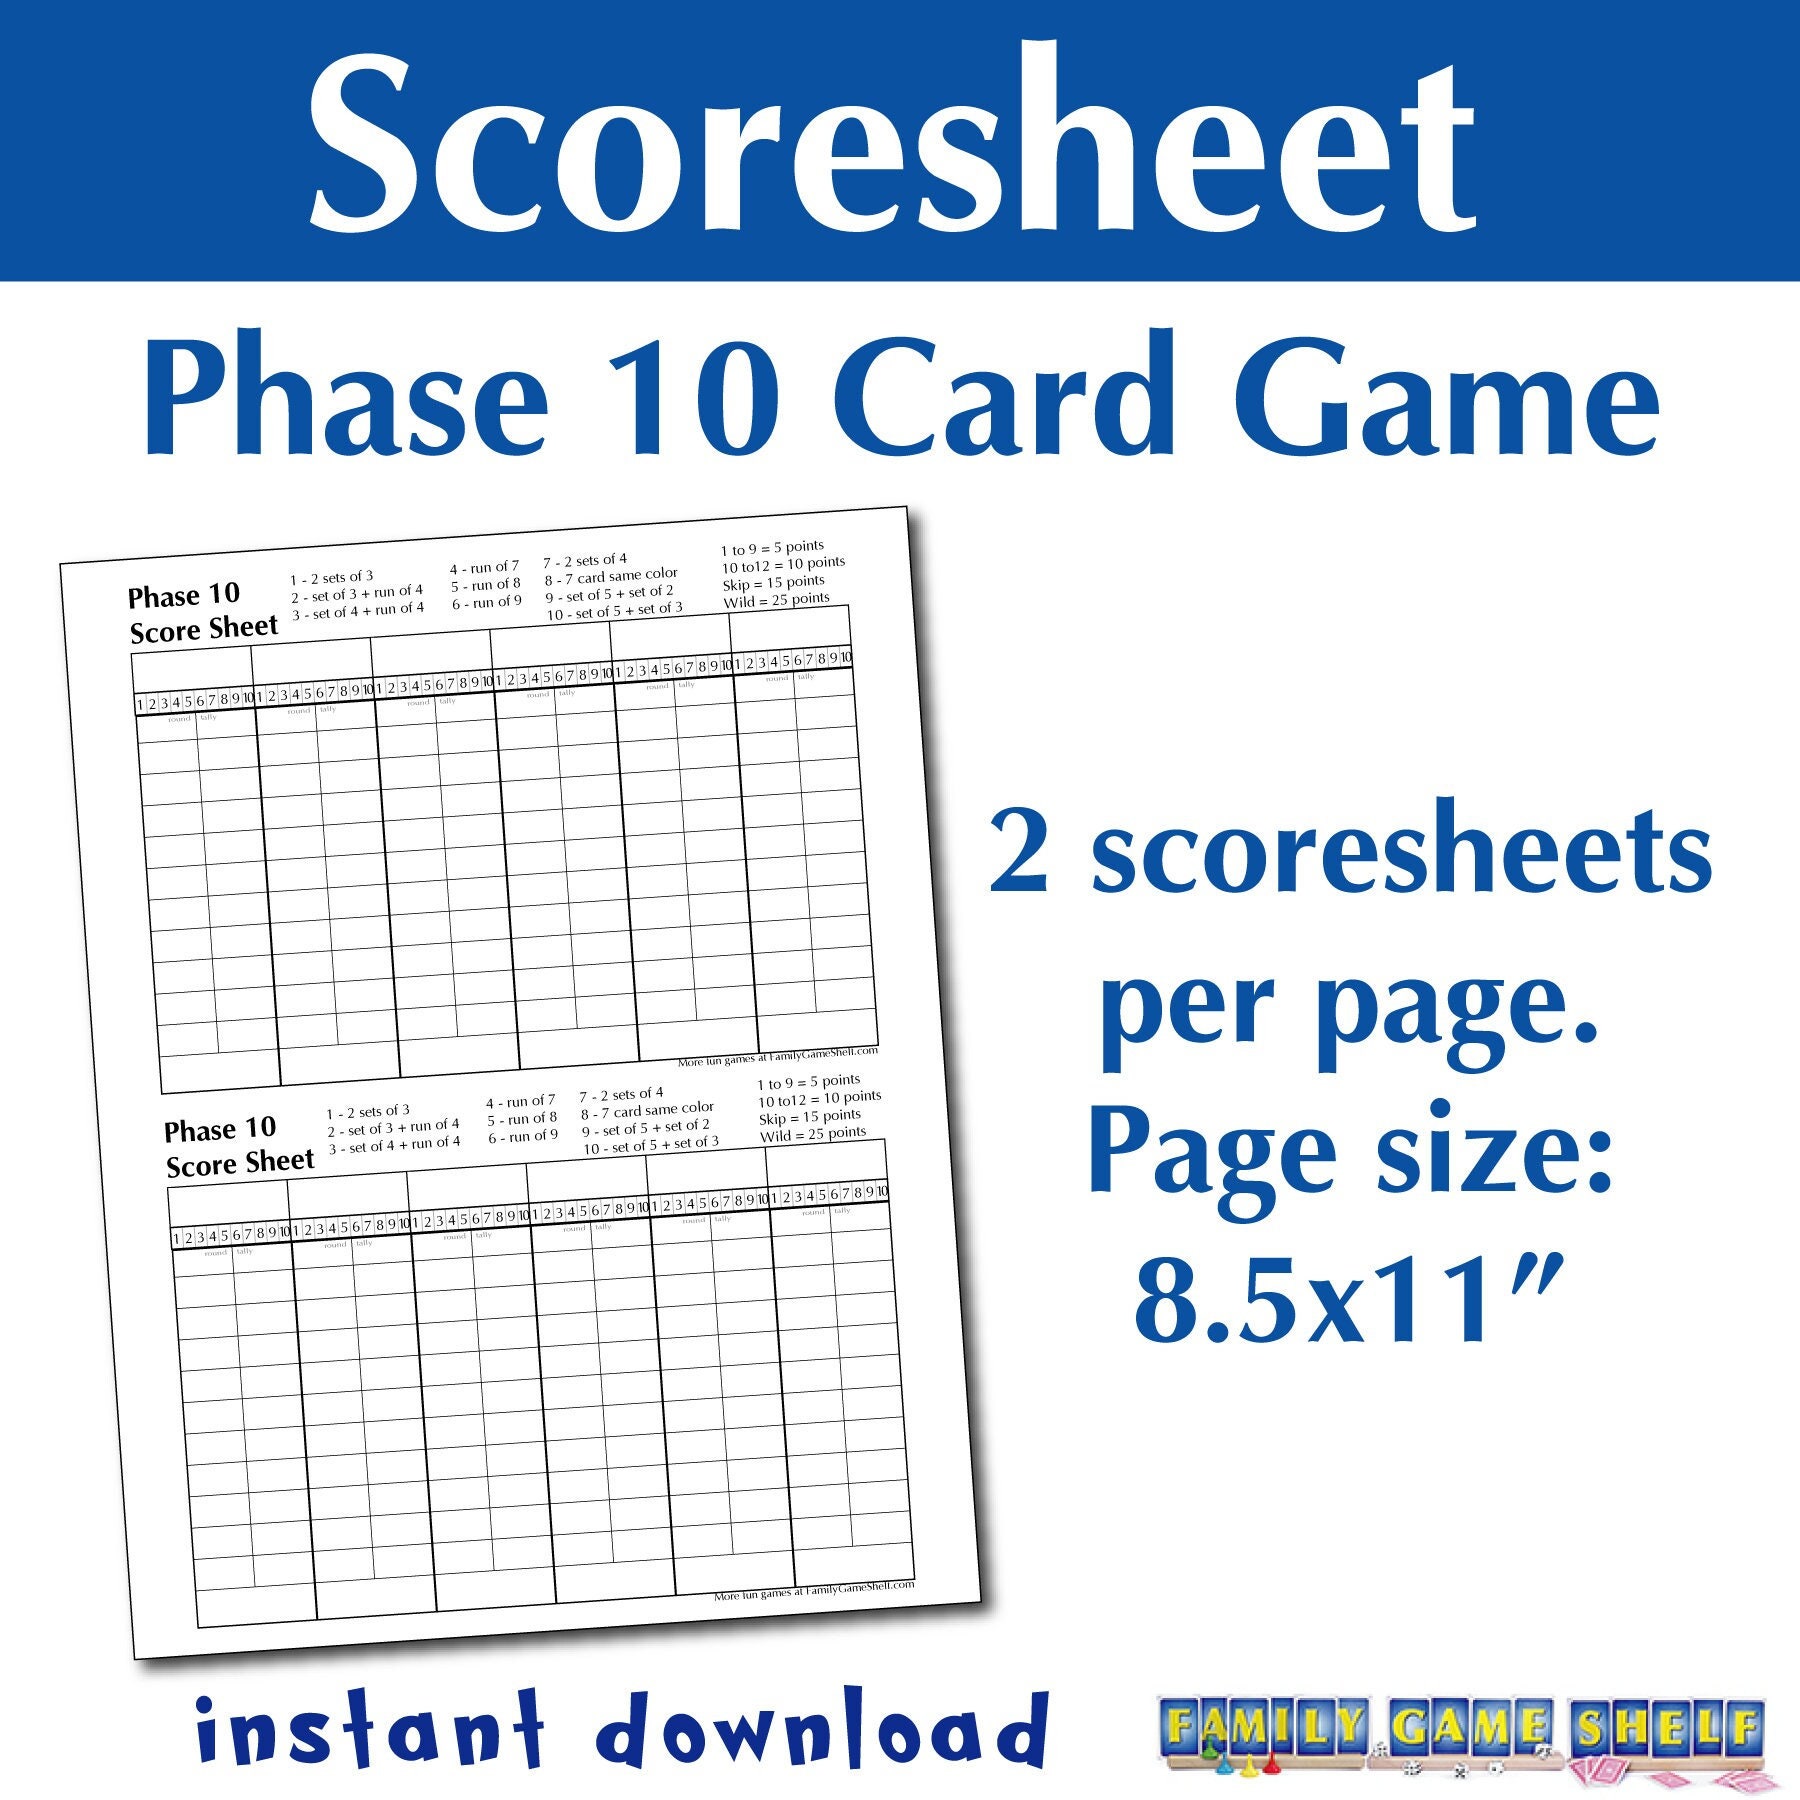 Phase 10 Score Board – Your Designs Unlimited